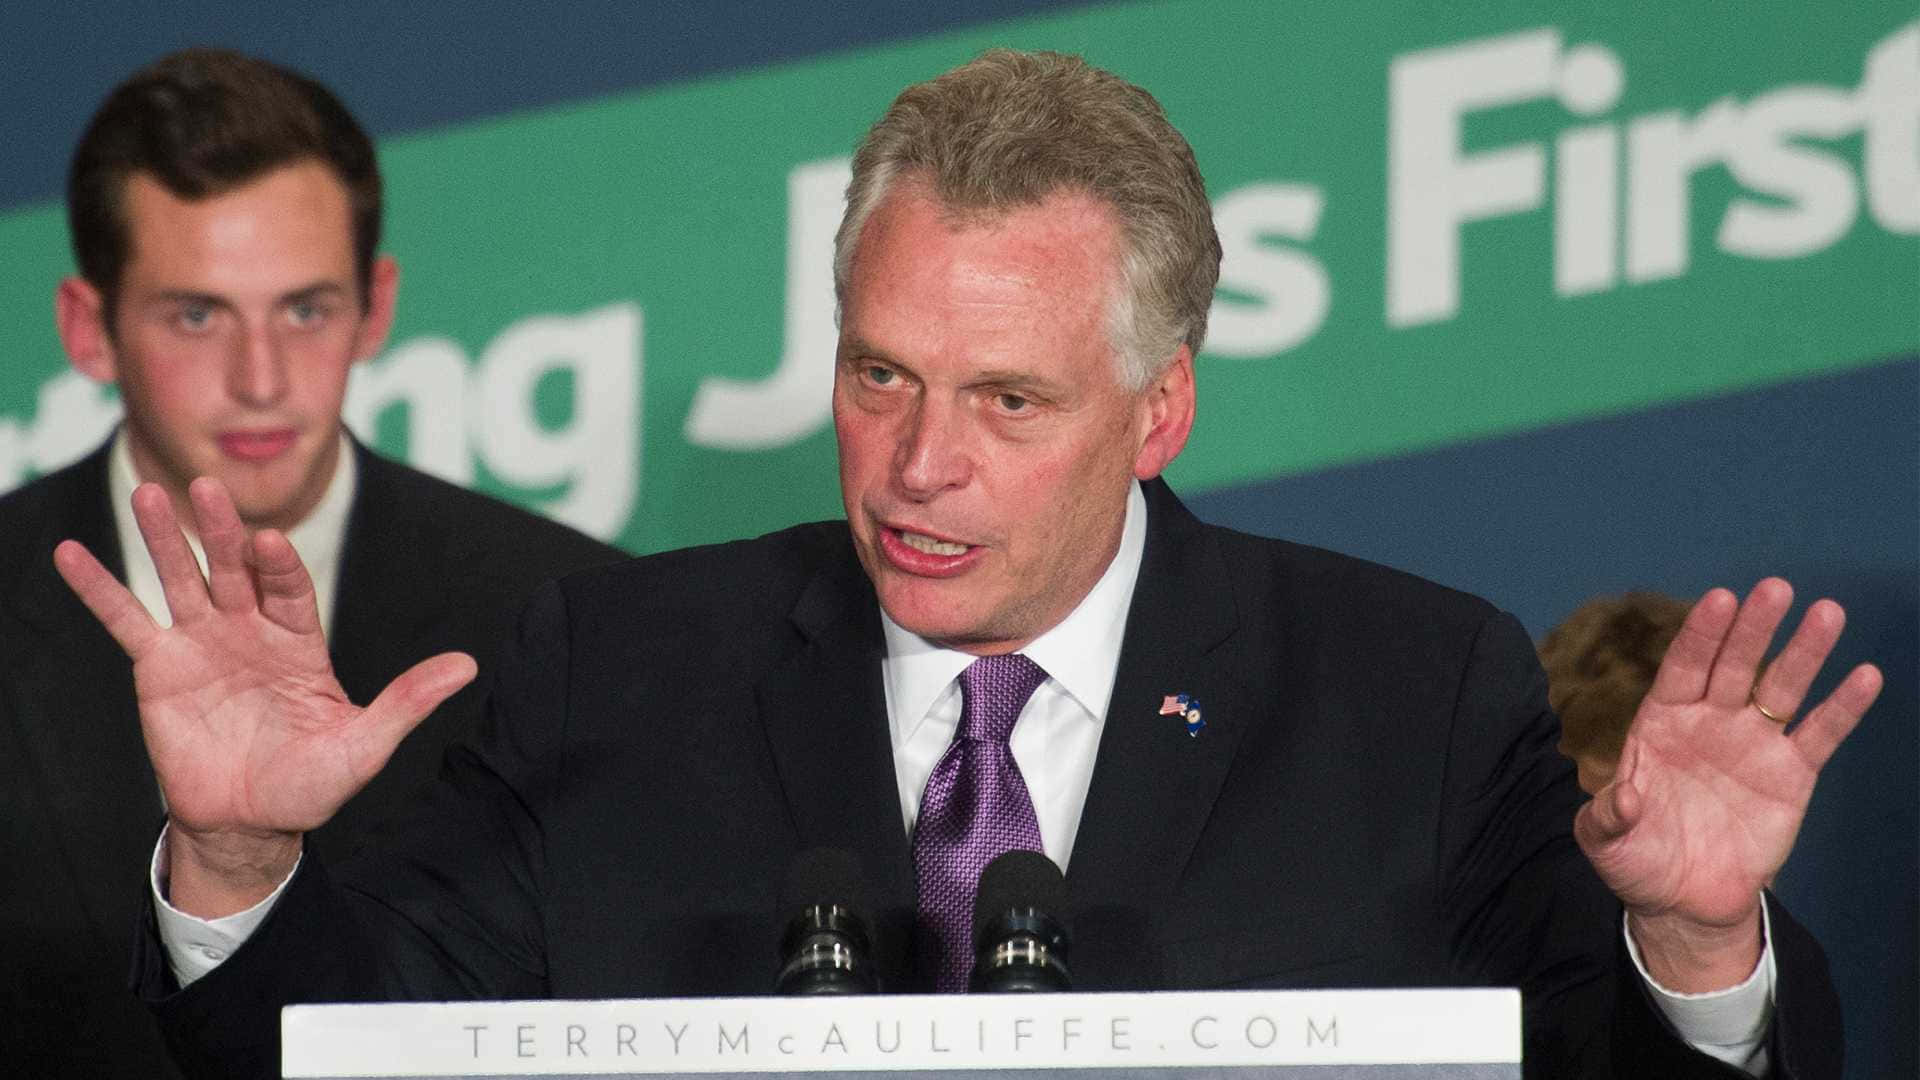 Terry McAuliffe delivering a powerful speech. Wallpaper